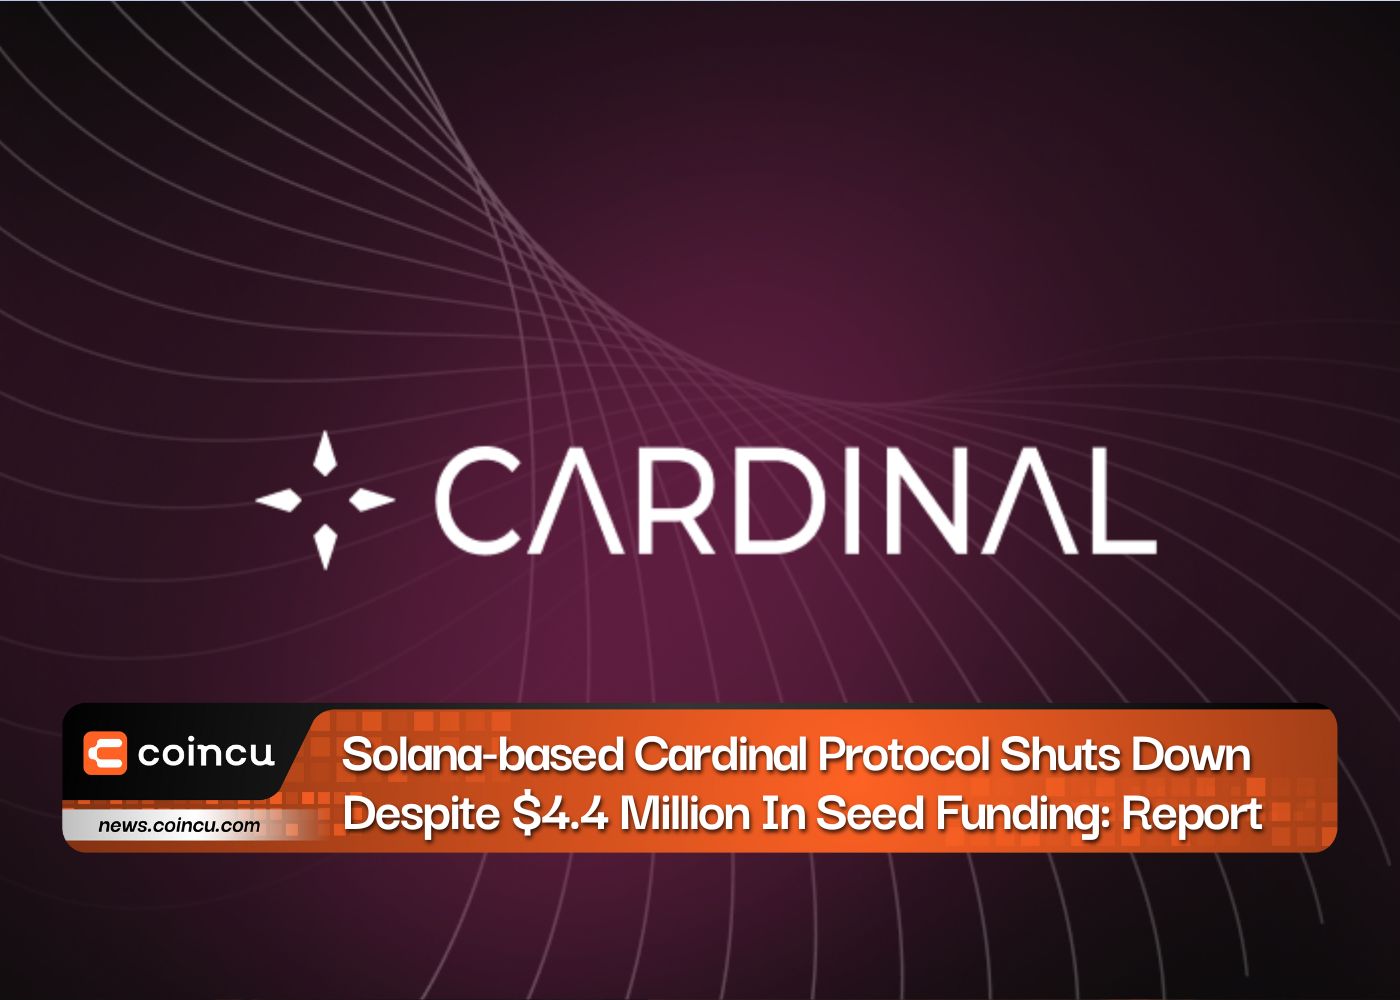 Solana-based Cardinal Protocol Shuts Down Despite $4.4 Million In Seed Funding: Report